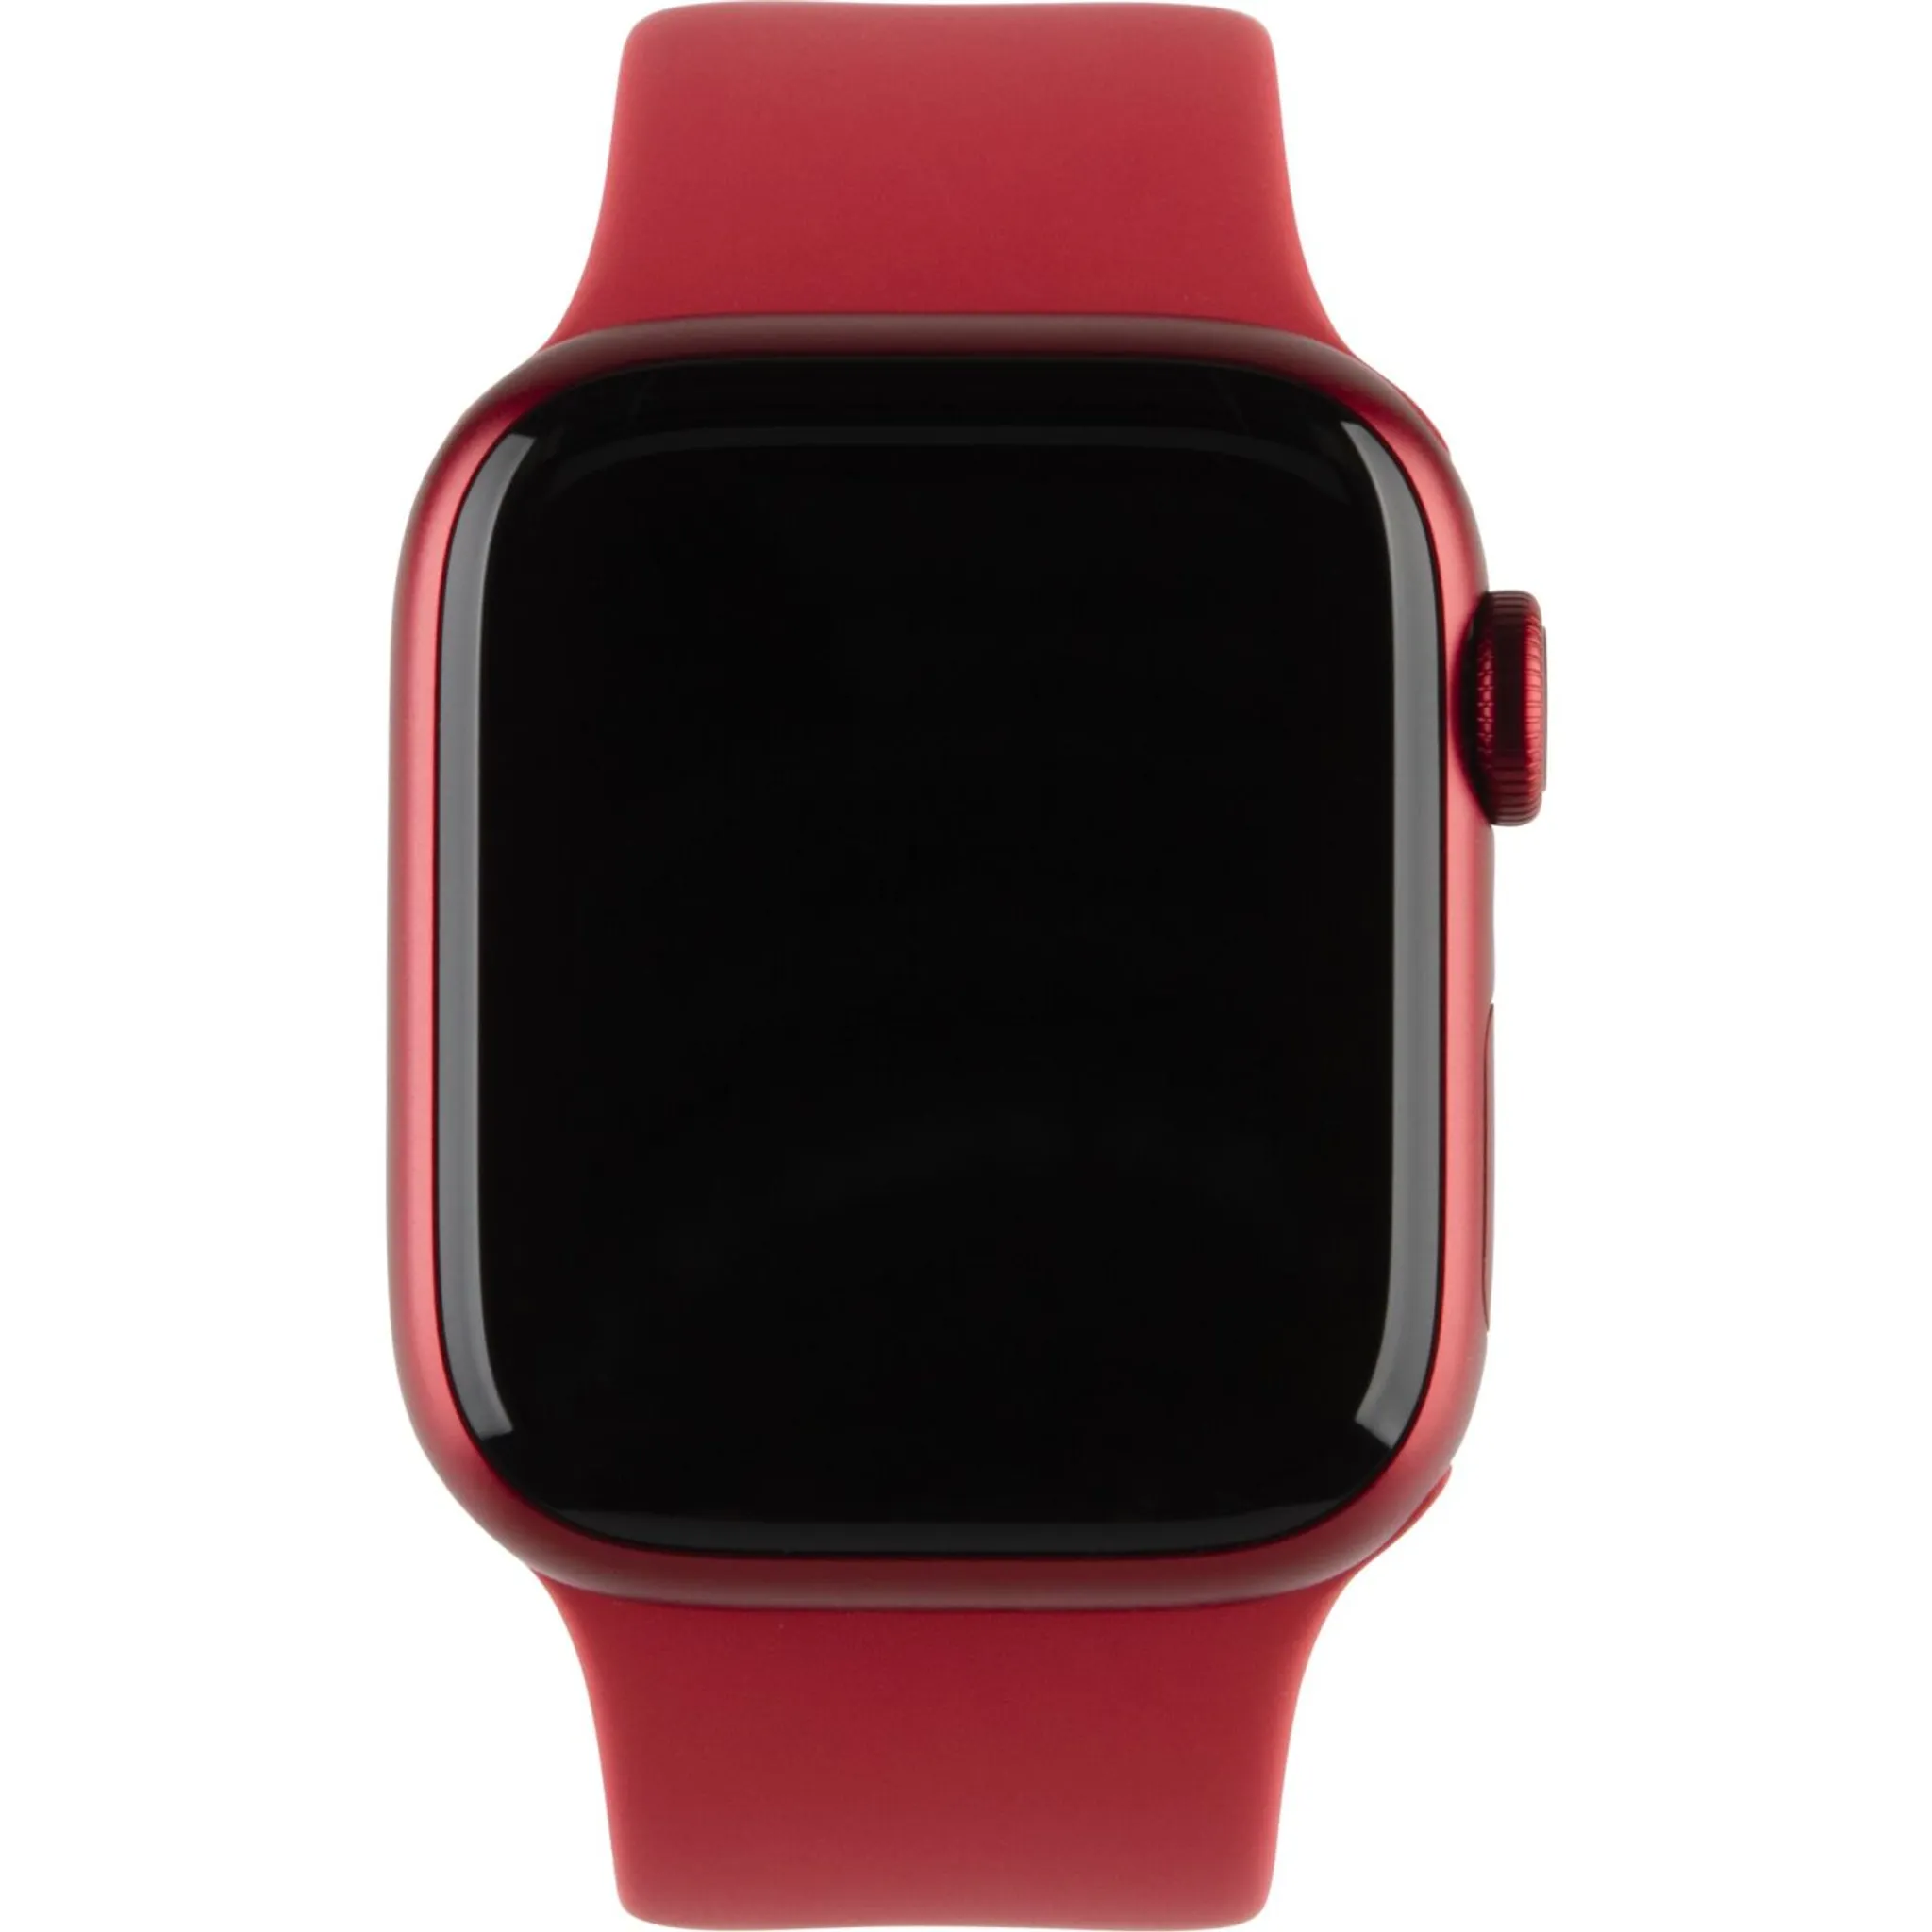 Apple 41mm Sport Cell, GPS Alu + (PRODUCT)RED, 7 Watch